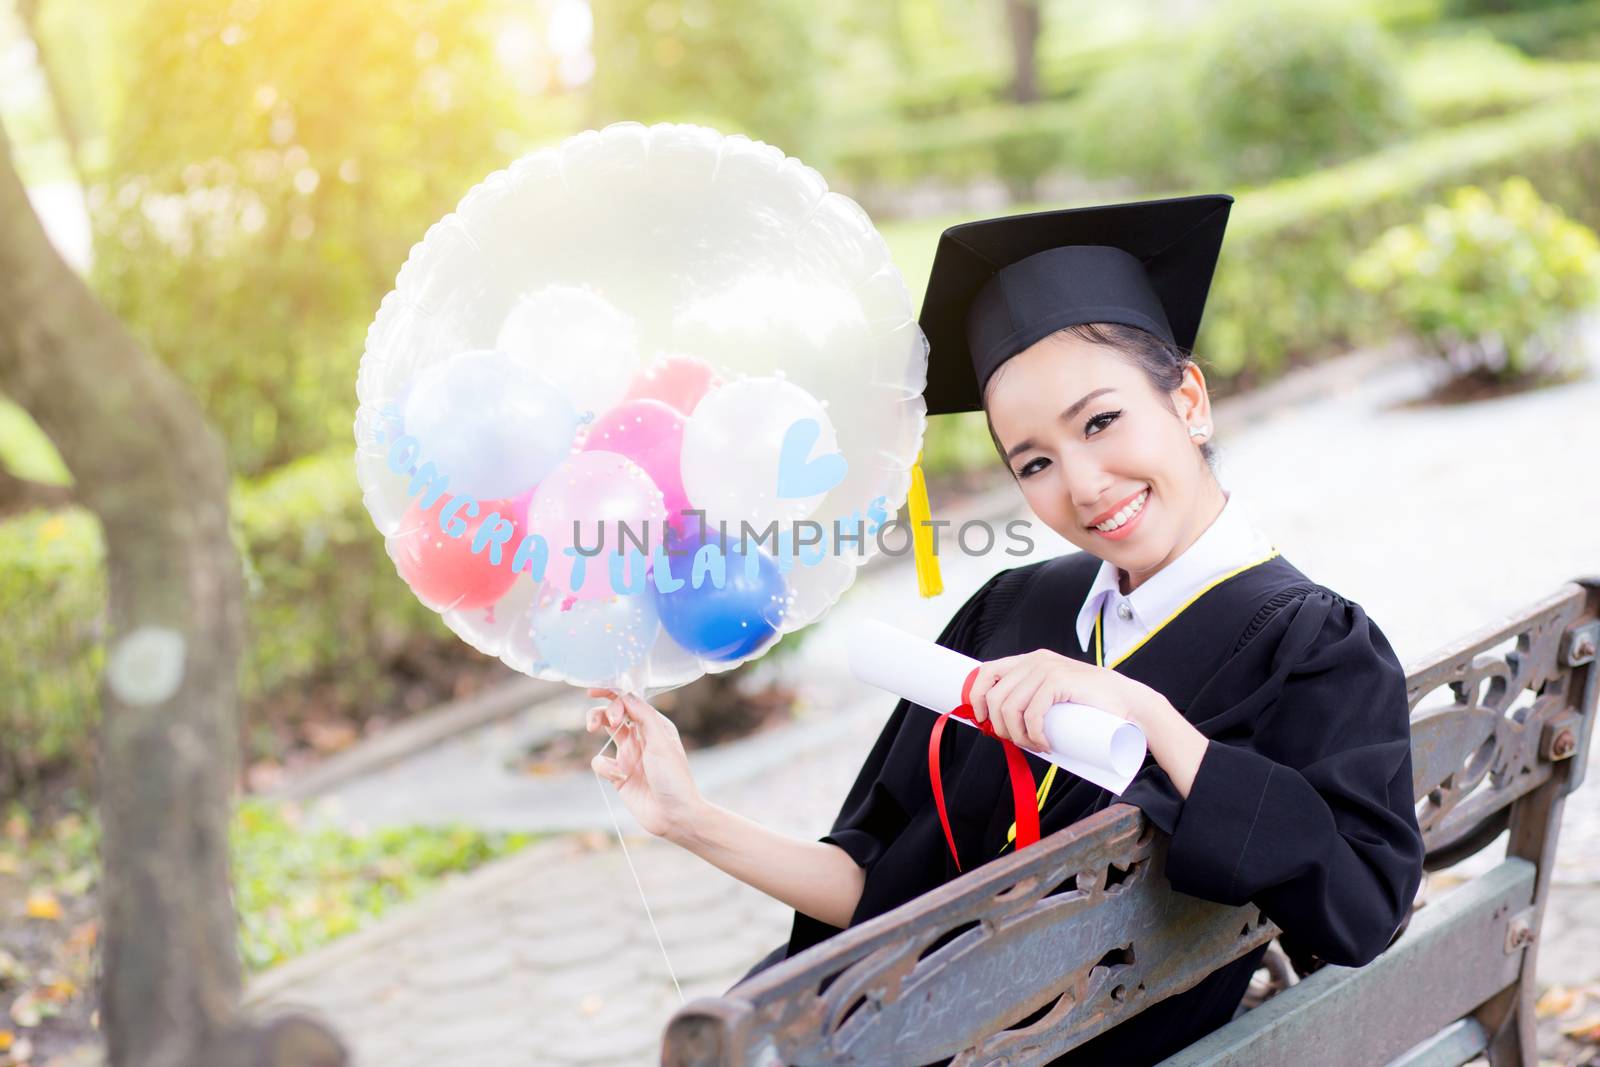 Portrait of happy young female graduates in academic dress and square academic cap holding word quotes of CONGRATS GRAD on balloon after convocation ceremony.